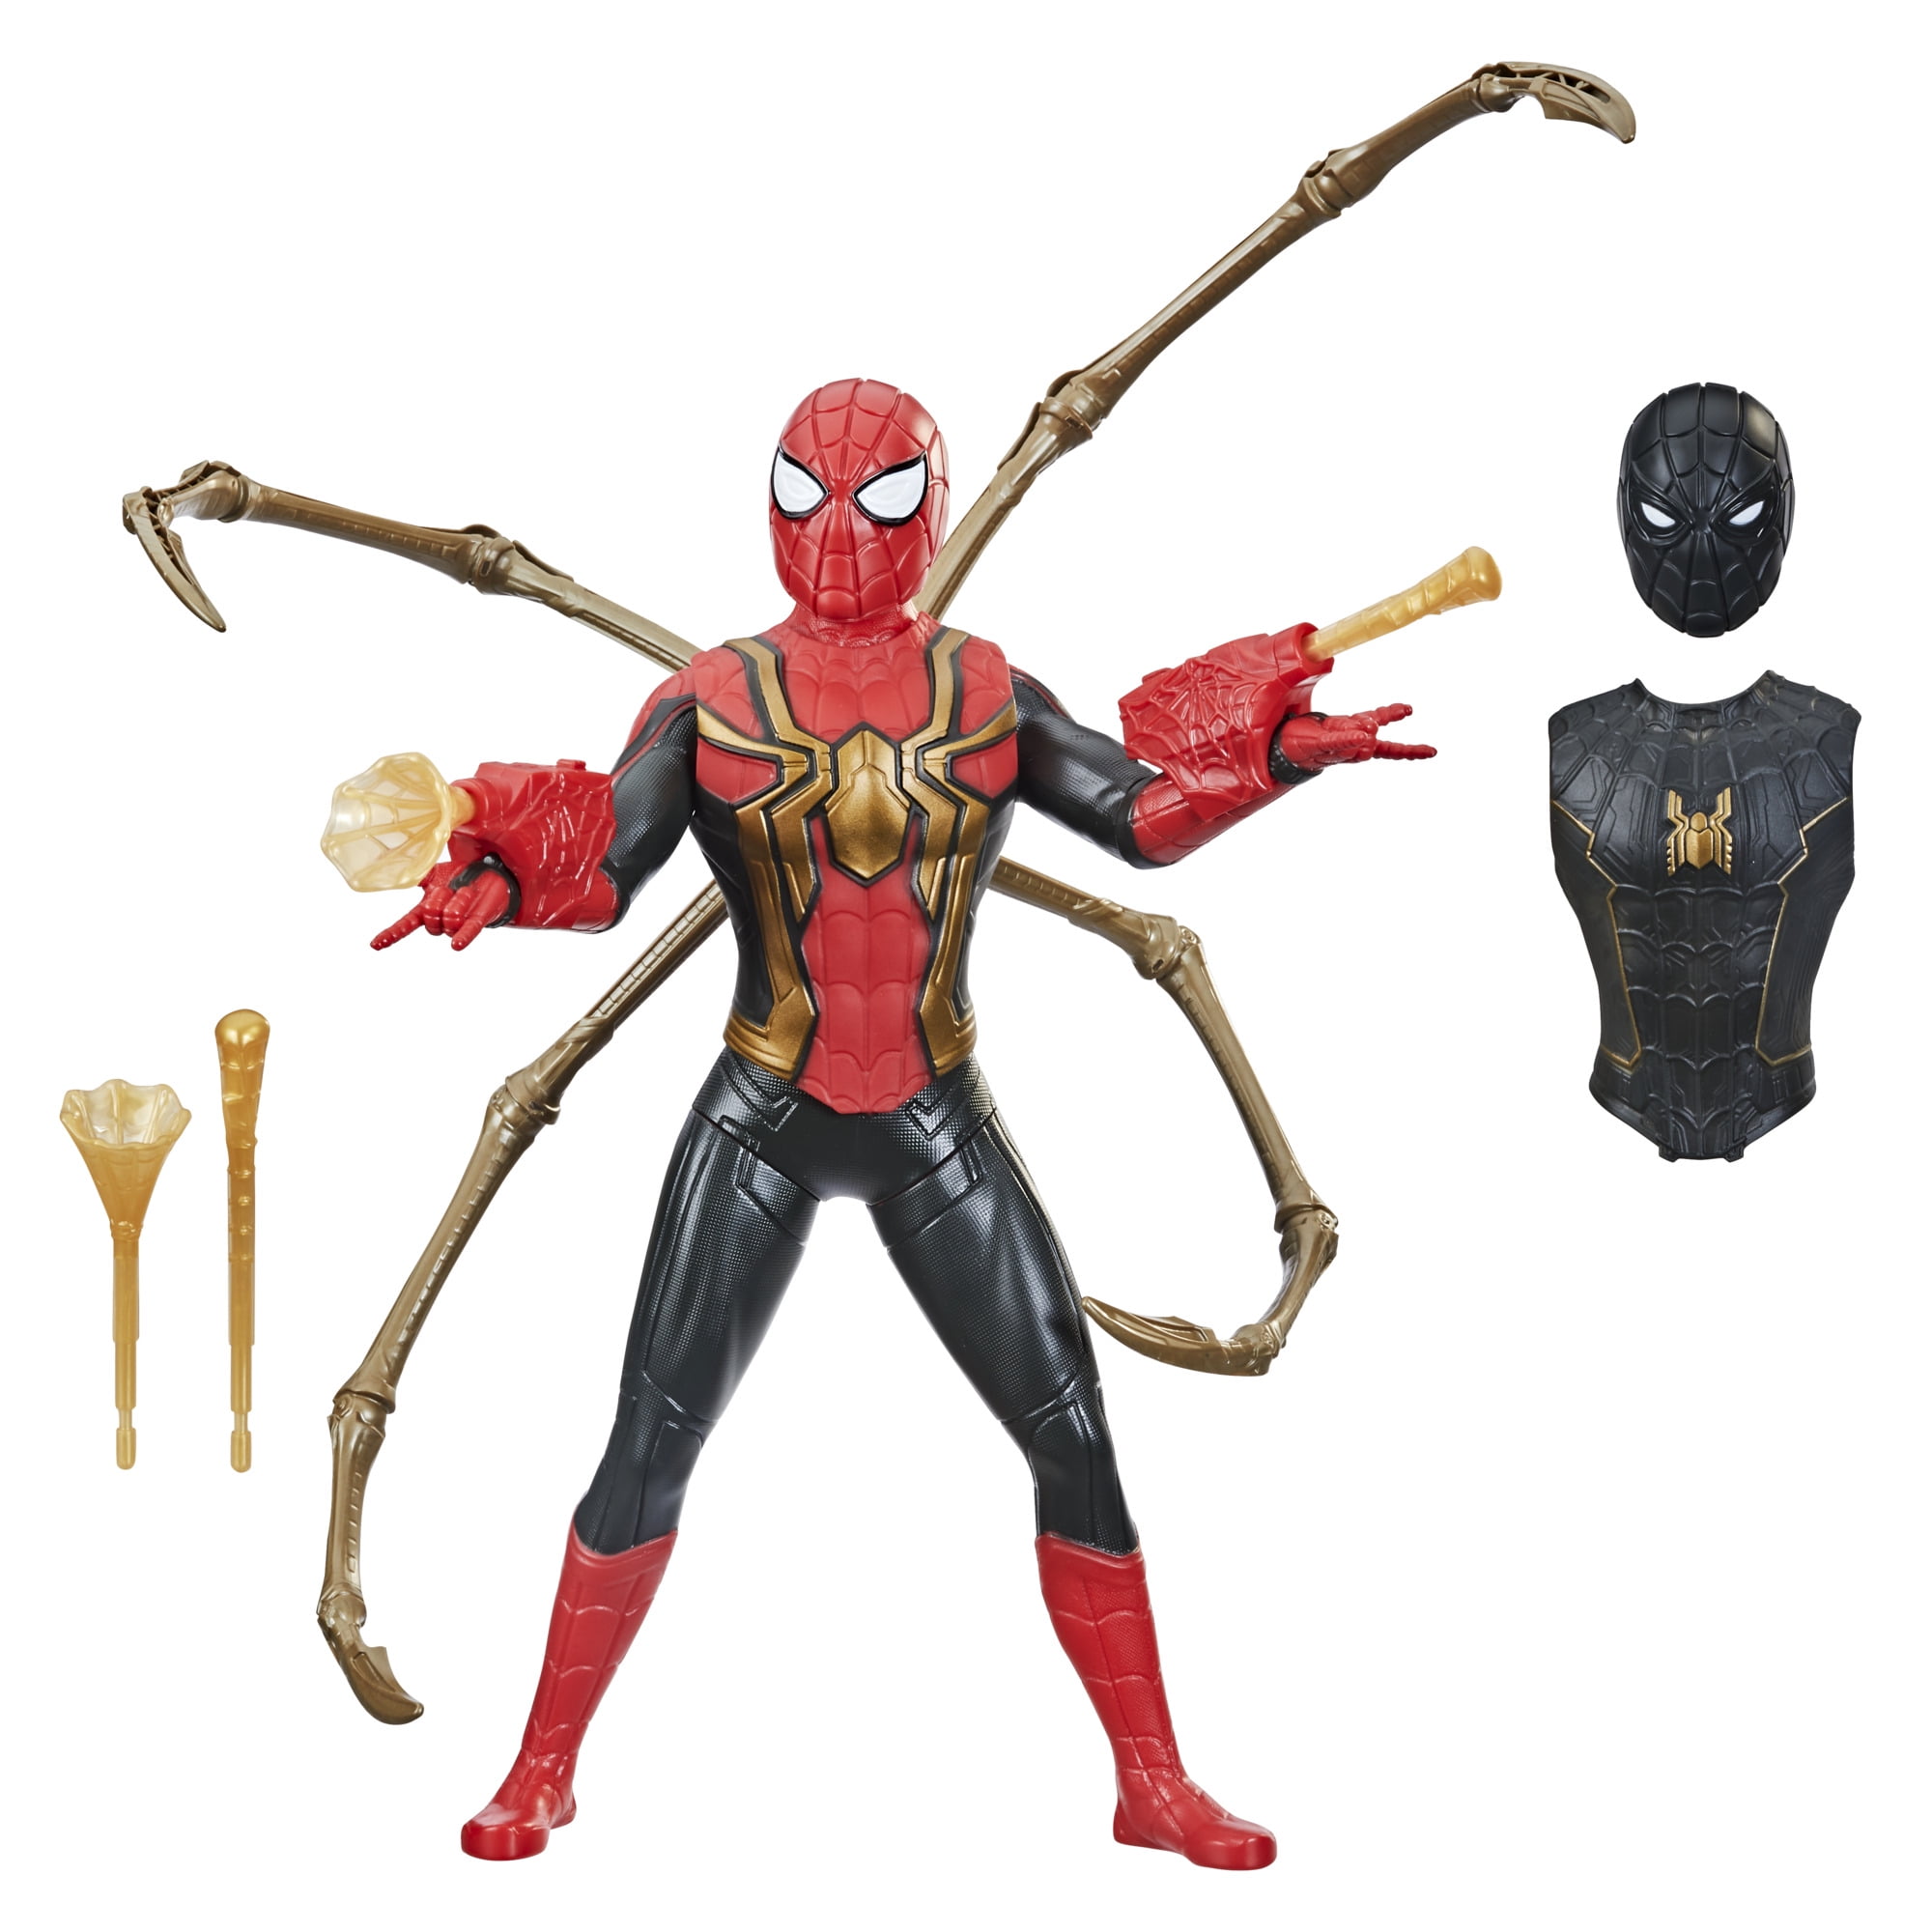 Hot Toys Spider-Man 12 inch Action Figure for sale online 